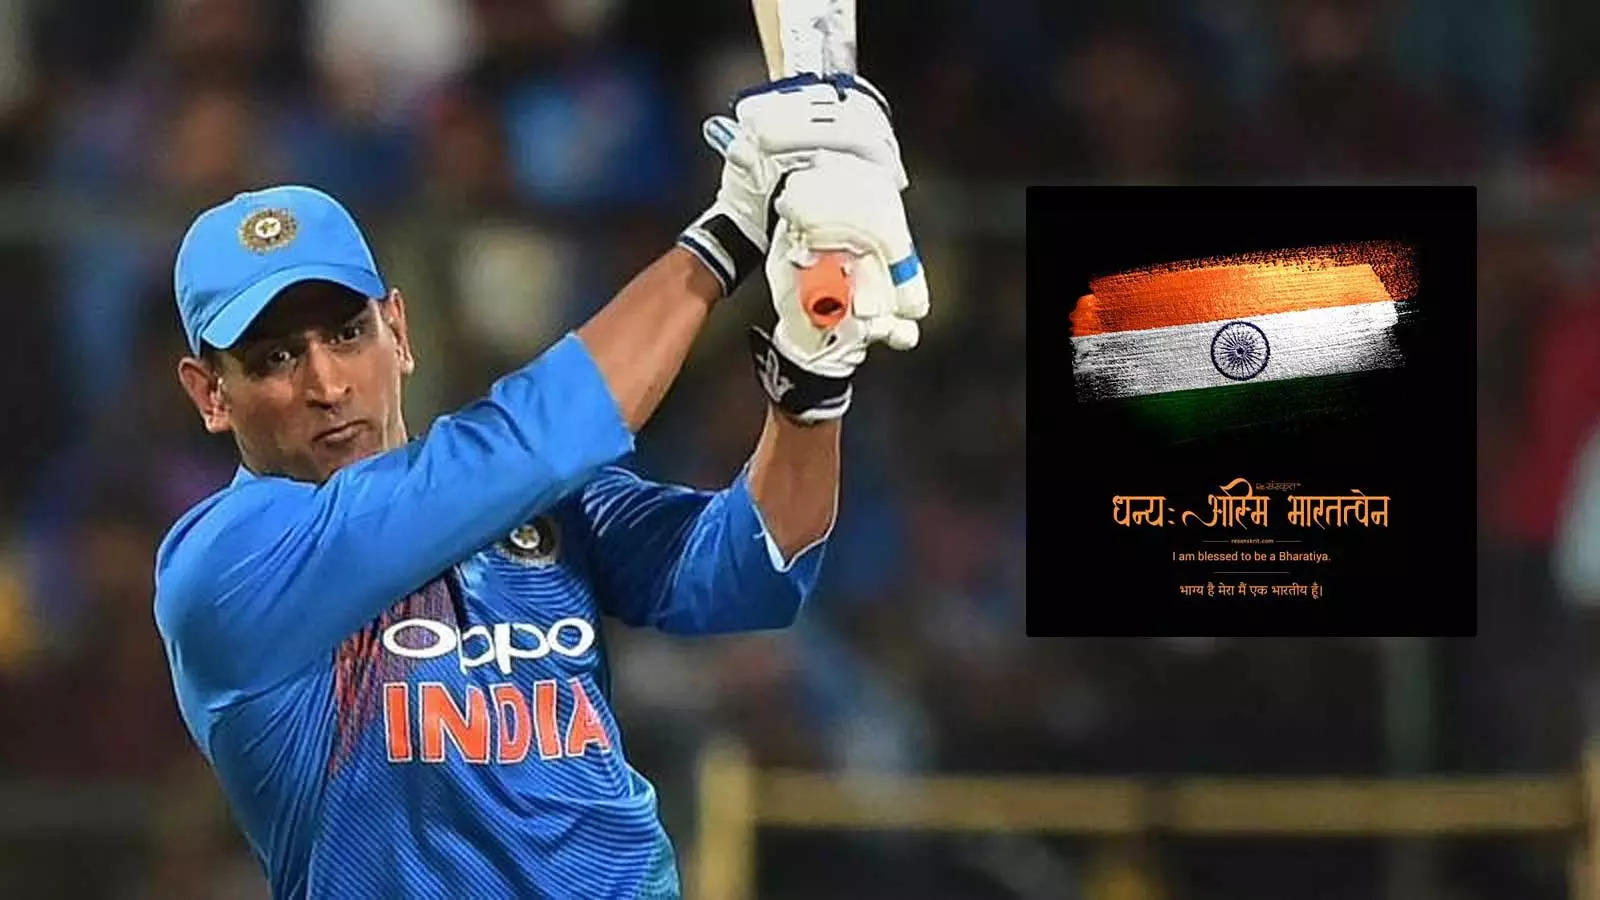 I am blessed to be a Bharatiya': MS Dhoni changes his Instagram DP ahead of  Independence day